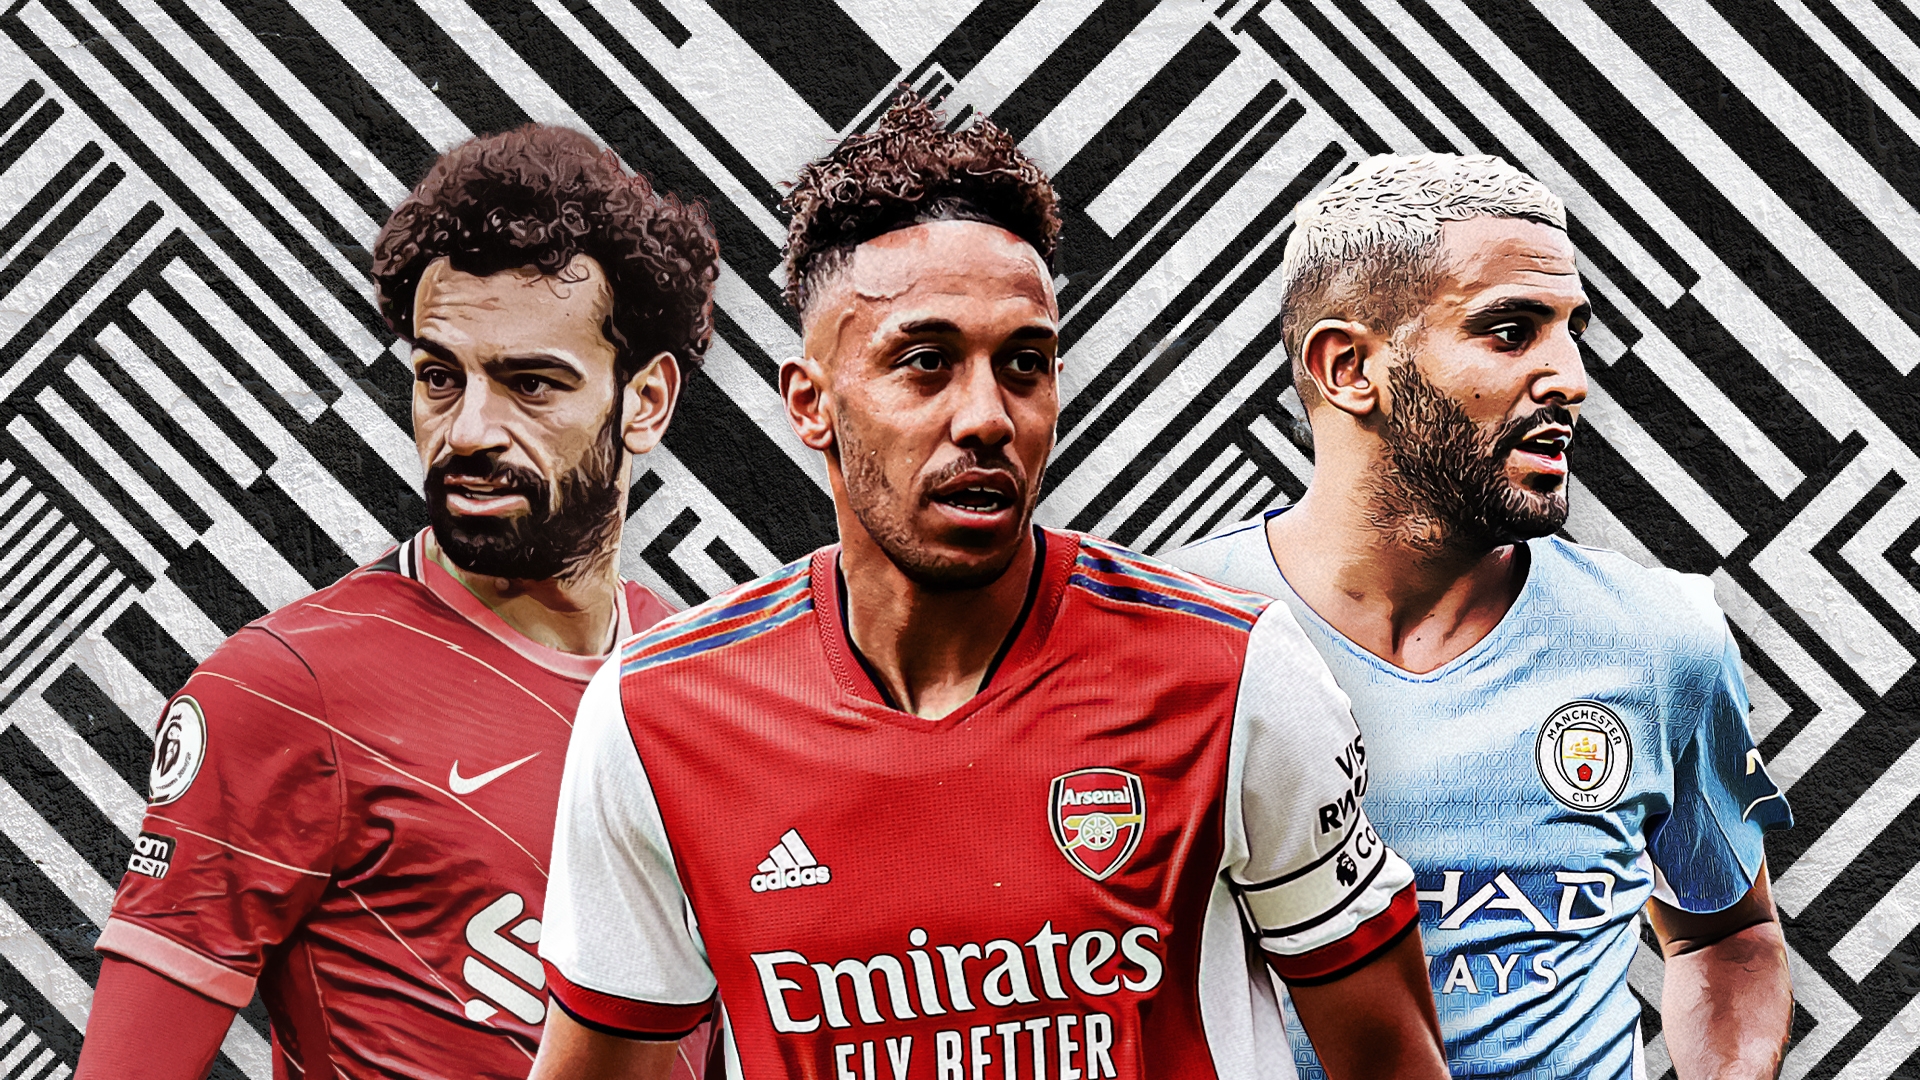 Fantasy Football: Premier League 2021 22 Tips, Best Players, Rules, Prizes & Guide To FPL Game